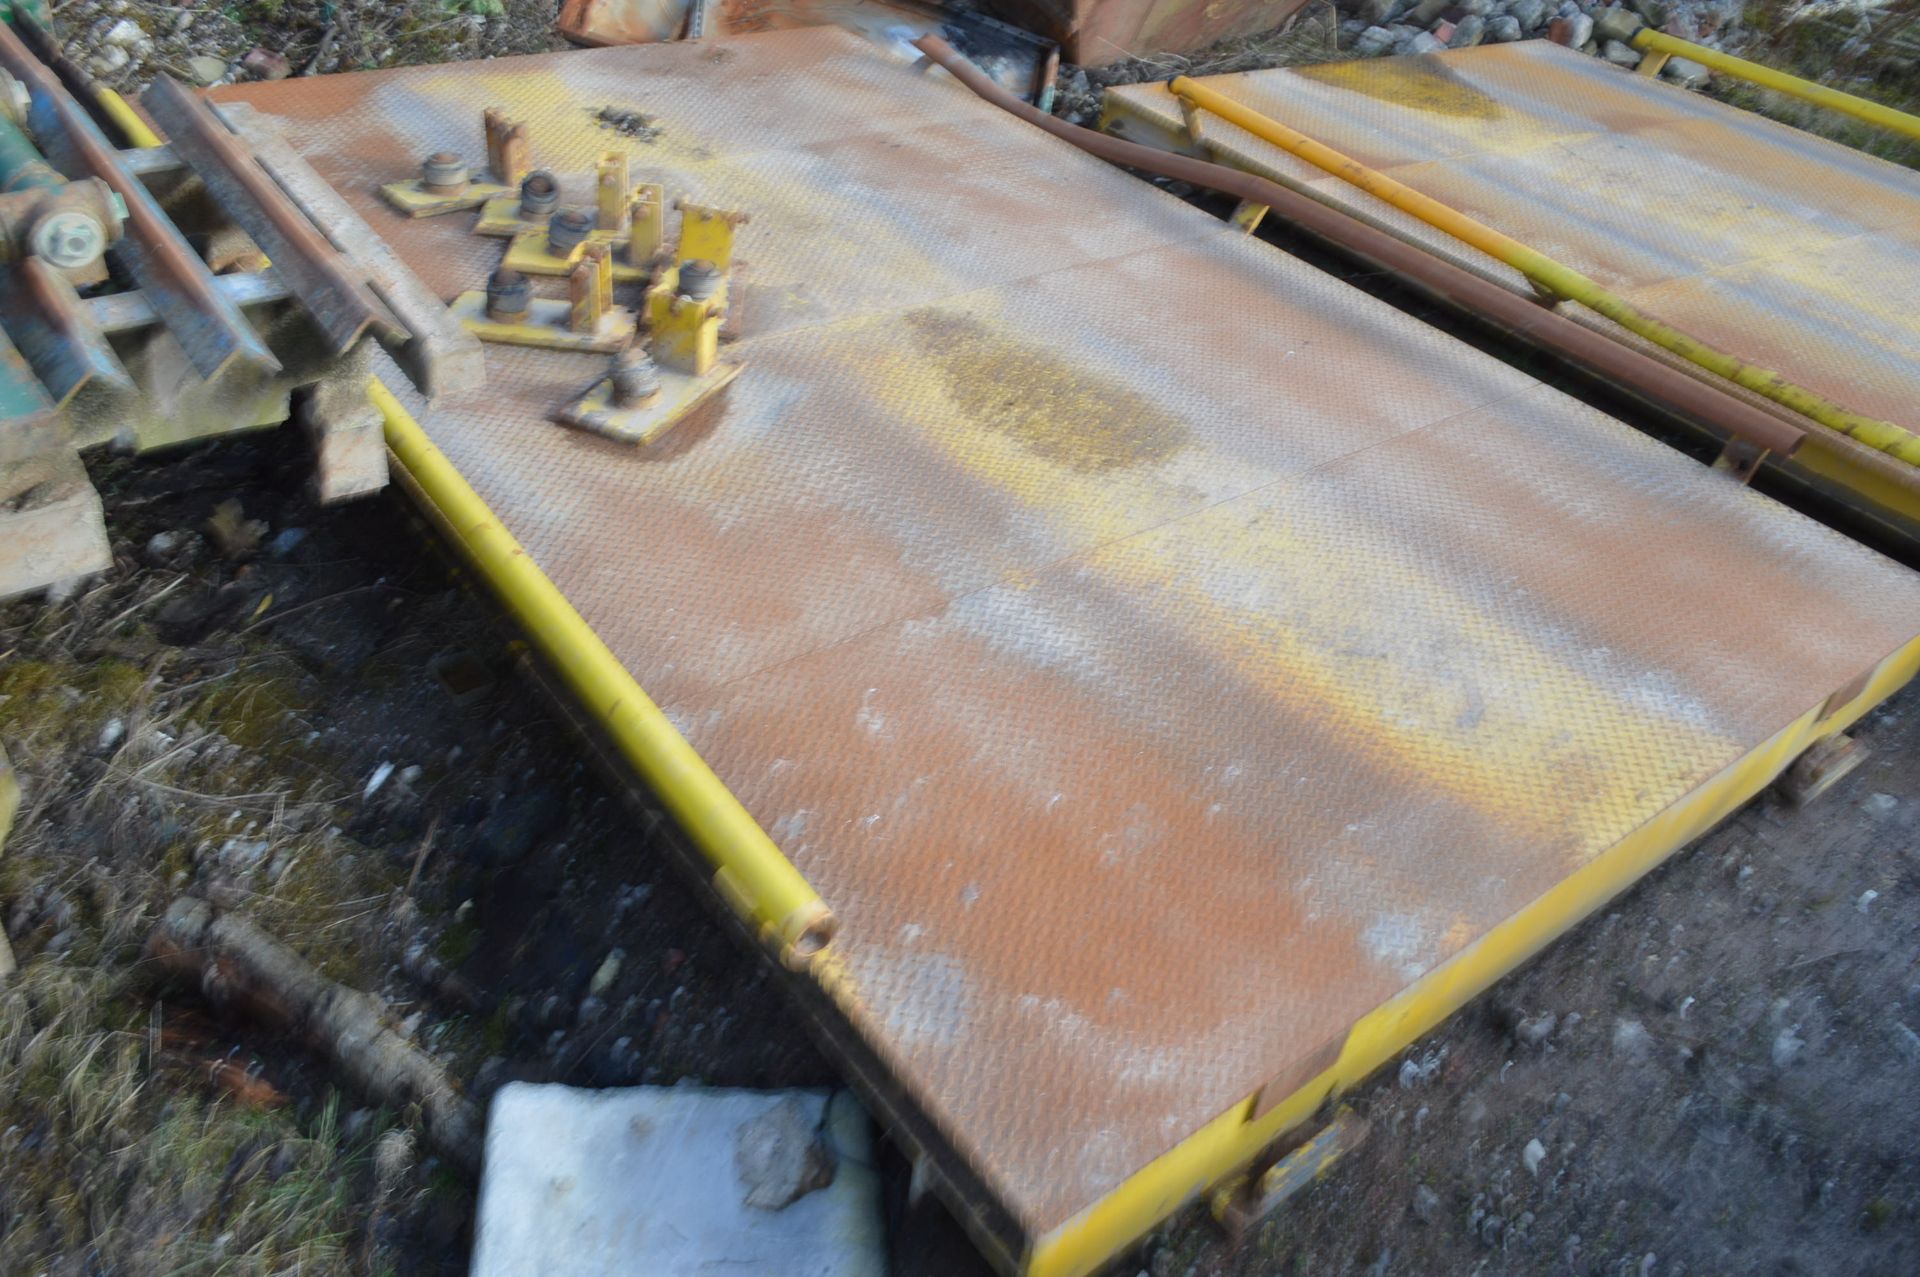 TWO SECTION ROAD VEHICLE WEIGHBRIDGE, each section approx. 5m x 3m, with equipment as set out